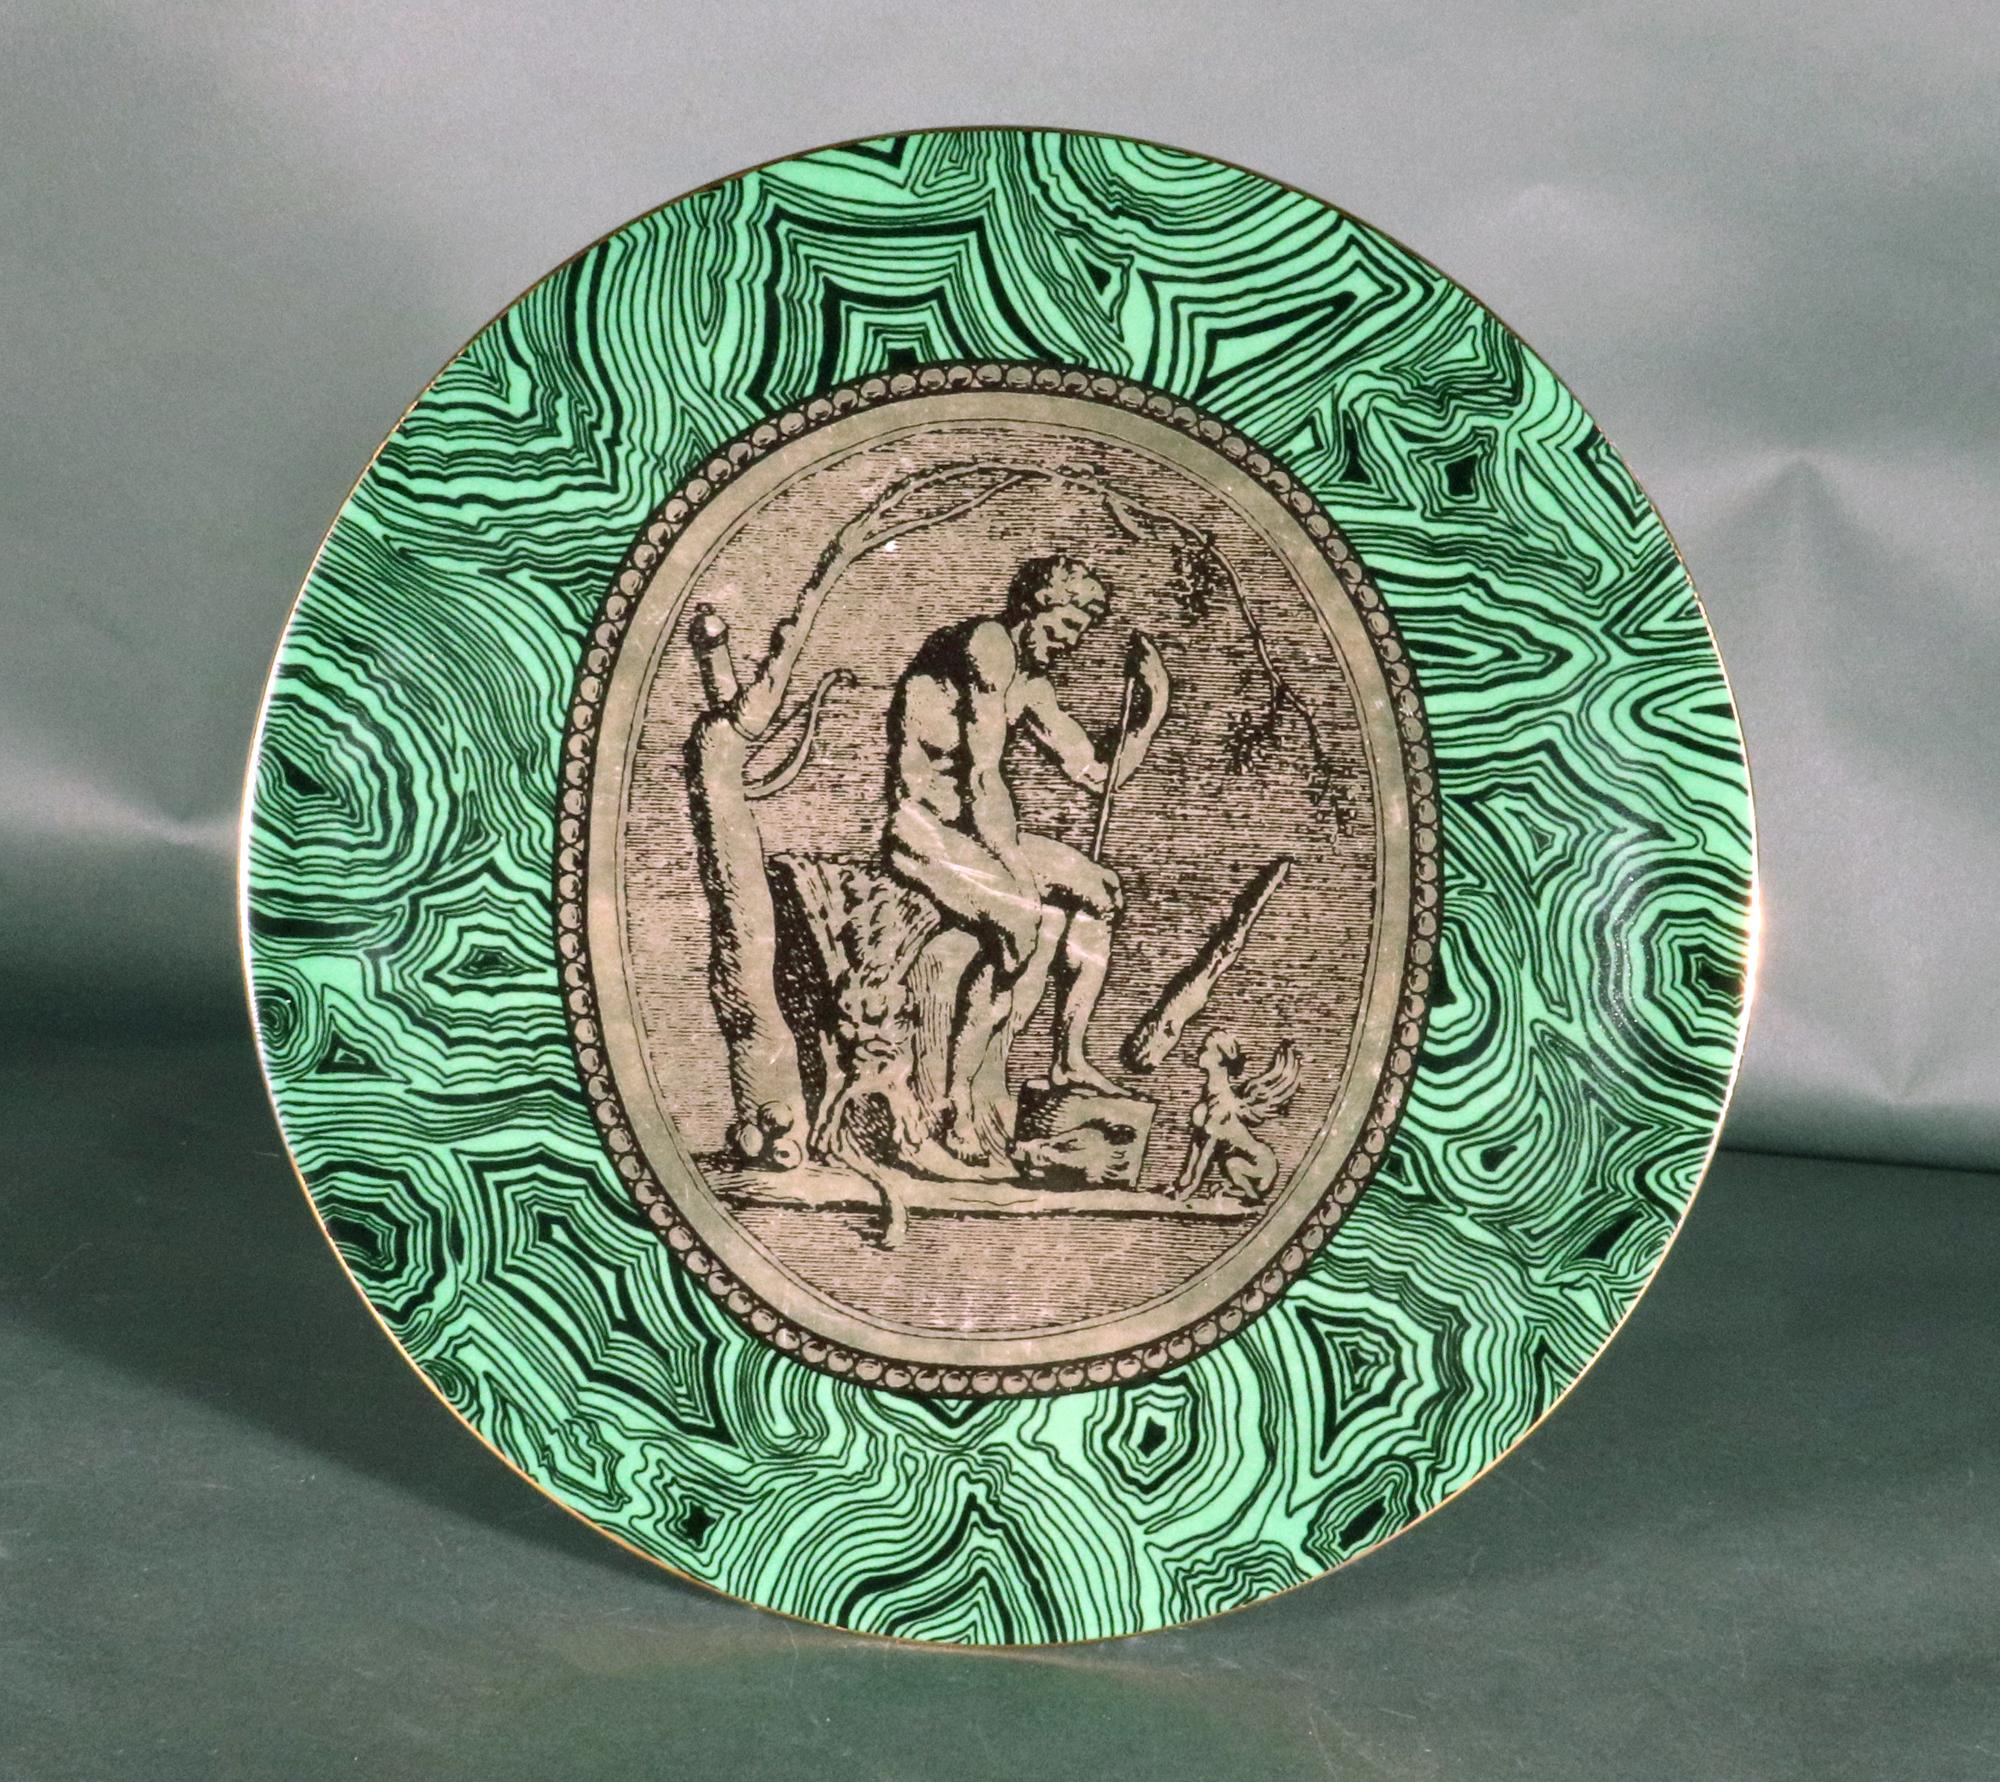 Piero Fornasetti Porcelain Green Malachite Cammei Plate,
Cammei or Cameo,
Circa 1950s-60s

From a set of five which are each sold individually.

The Piero Fornasetti porcelain plate, named Cammei on the reverse, meaning Cameo, has a ground of green